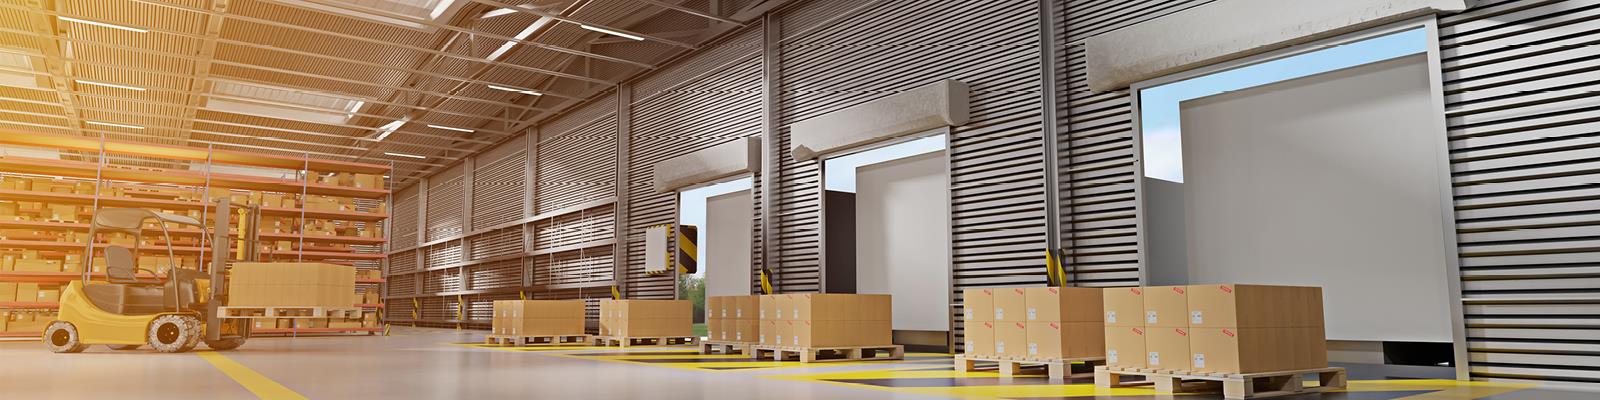 Interior shot of warehouse with forklift and stacked boxes